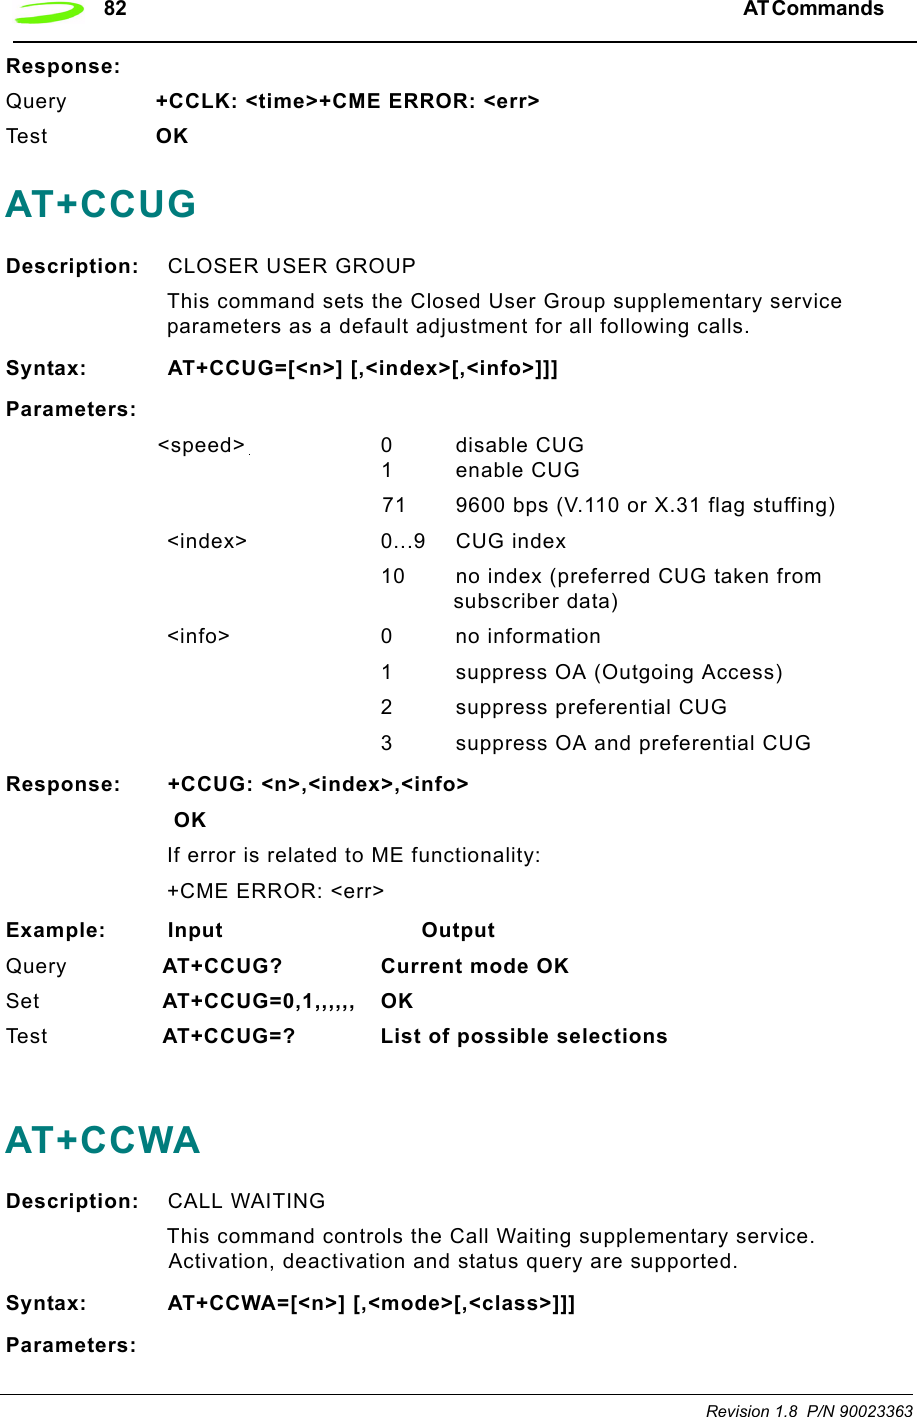 82 AT Commands  Revision 1.8  P/N 90023363Response:Query +CCLK: &lt;time&gt;+CME ERROR: &lt;err&gt;Te s t   OKAT+CCUGDescription: CLOSER USER GROUP This command sets the Closed User Group supplementary service parameters as a default adjustment for all following calls.Syntax: AT+CCUG=[&lt;n&gt;] [,&lt;index&gt;[,&lt;info&gt;]]]Parameters:&lt;speed&gt; 0disable CUG1 enable CUG71 9600 bps (V.110 or X.31 flag stuffing)&lt;index&gt; 0...9 CUG index10 no index (preferred CUG taken from subscriber data)&lt;info&gt; 0 no information1 suppress OA (Outgoing Access)2 suppress preferential CUG3 suppress OA and preferential CUGResponse: +CCUG: &lt;n&gt;,&lt;index&gt;,&lt;info&gt; OKIf error is related to ME functionality:+CME ERROR: &lt;err&gt;Example: Input                            OutputQuery  AT+CCUG? Current mode OKSet  AT+CCUG=0,1,,,,,, OKTe s t   AT+CCUG=? List of possible selectionsAT+CCWADescription: CALL WAITINGThis command controls the Call Waiting supplementary service. Activation, deactivation and status query are supported.Syntax: AT+CCWA=[&lt;n&gt;] [,&lt;mode&gt;[,&lt;class&gt;]]]Parameters: